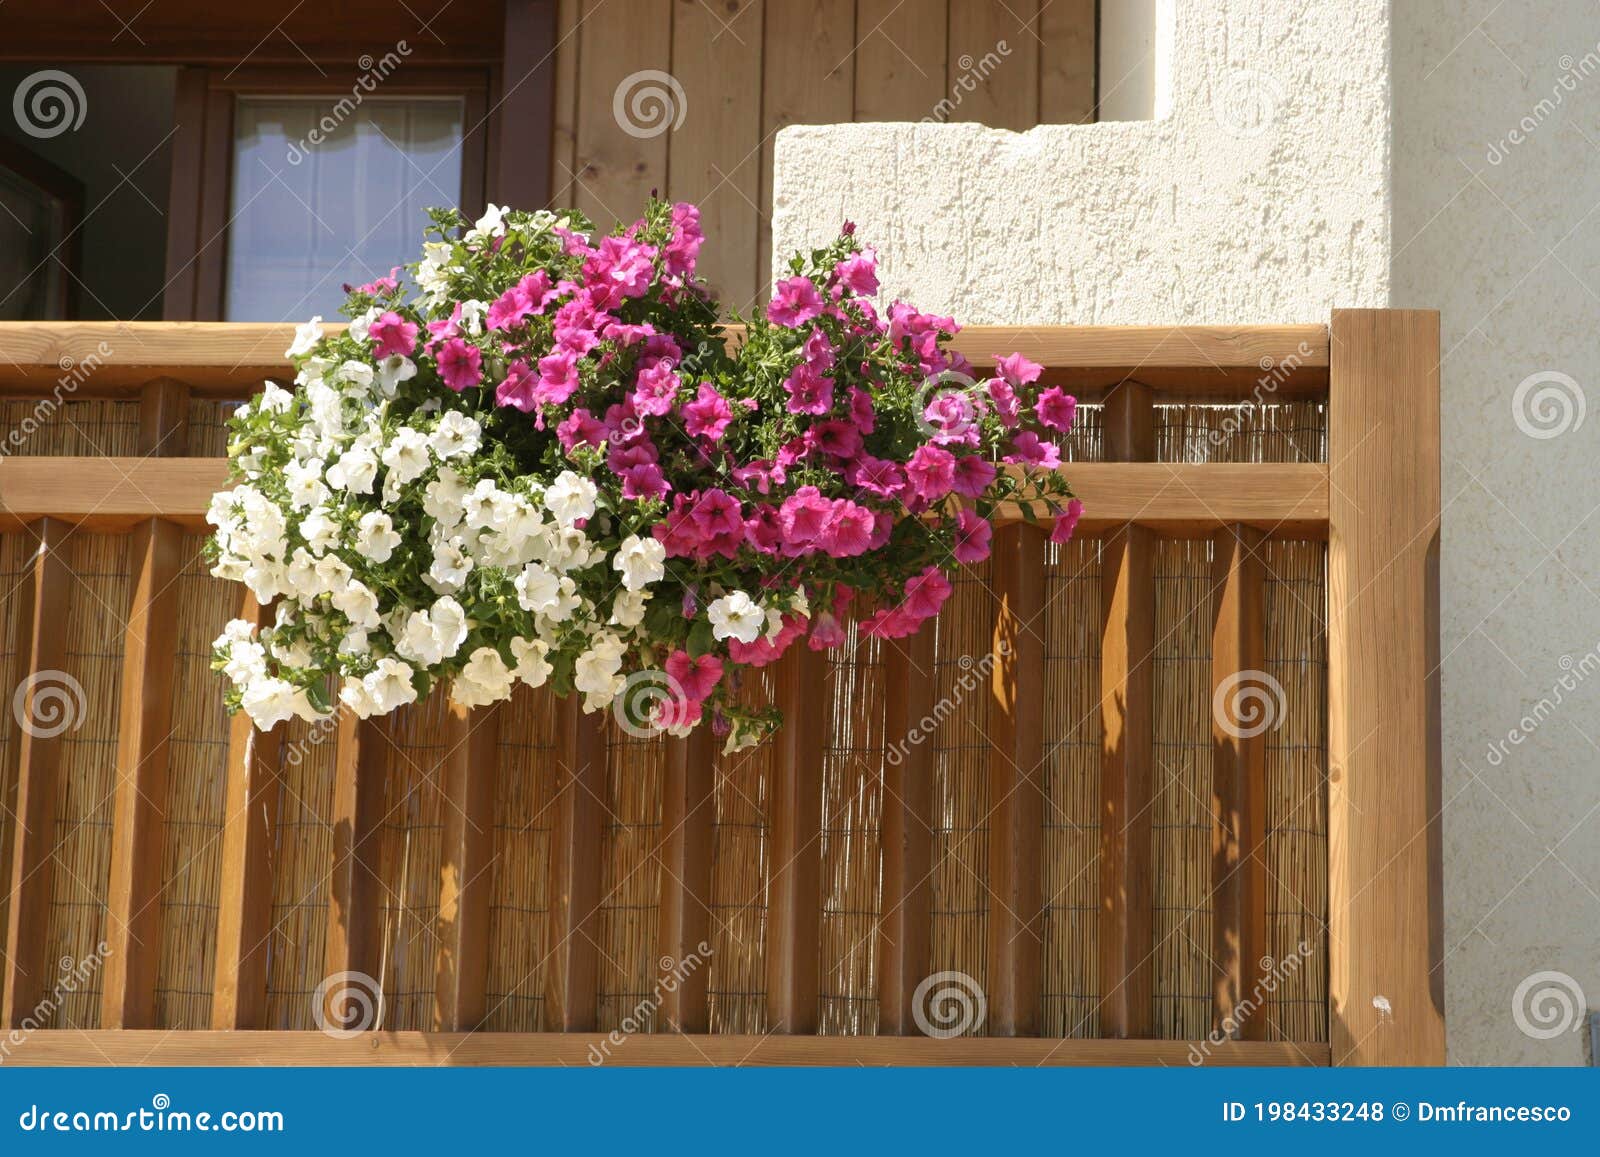 flowers in the balcons